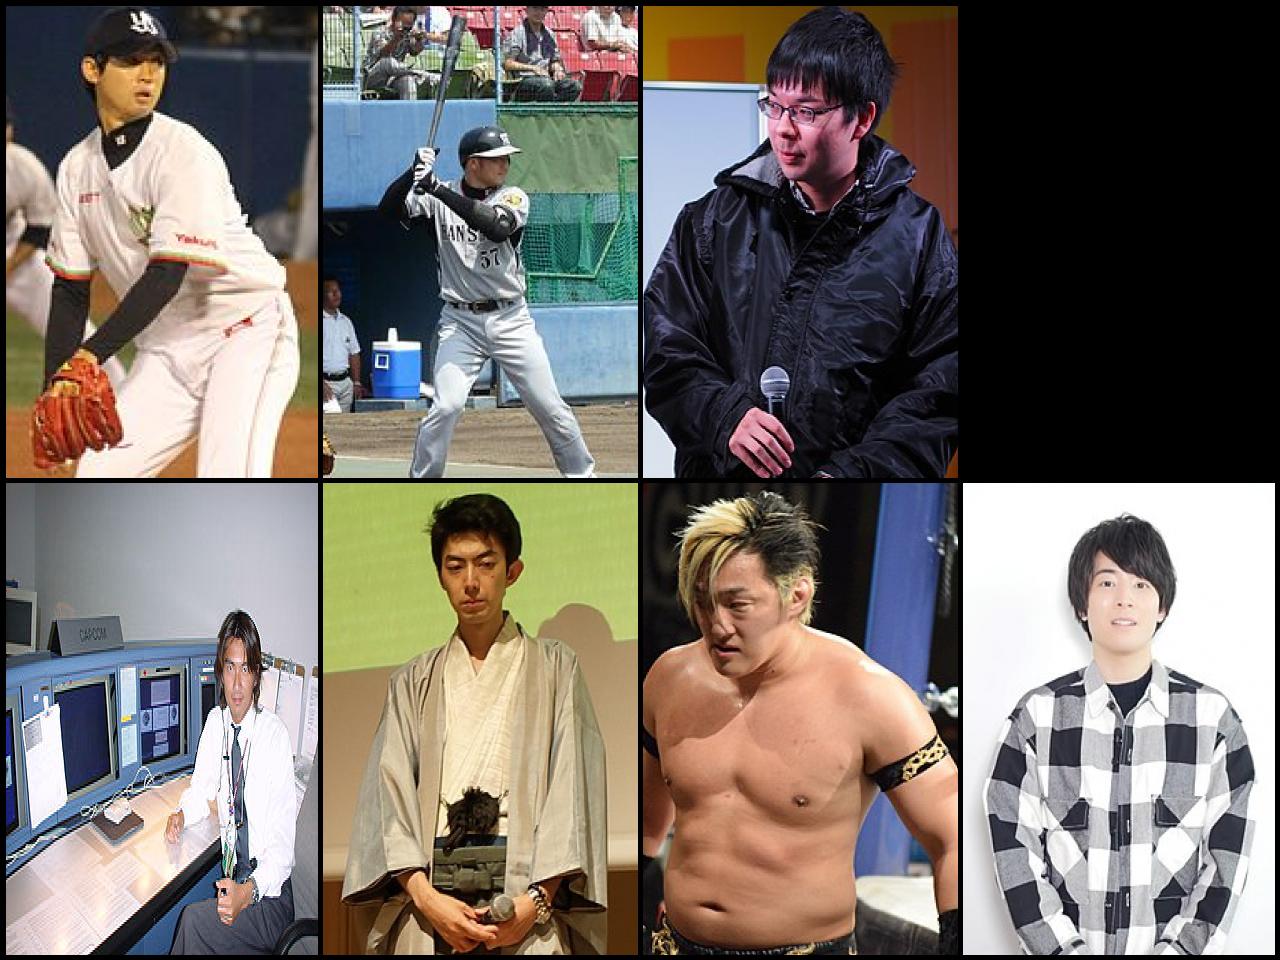 List of Famous people named <b>Taichi</b>